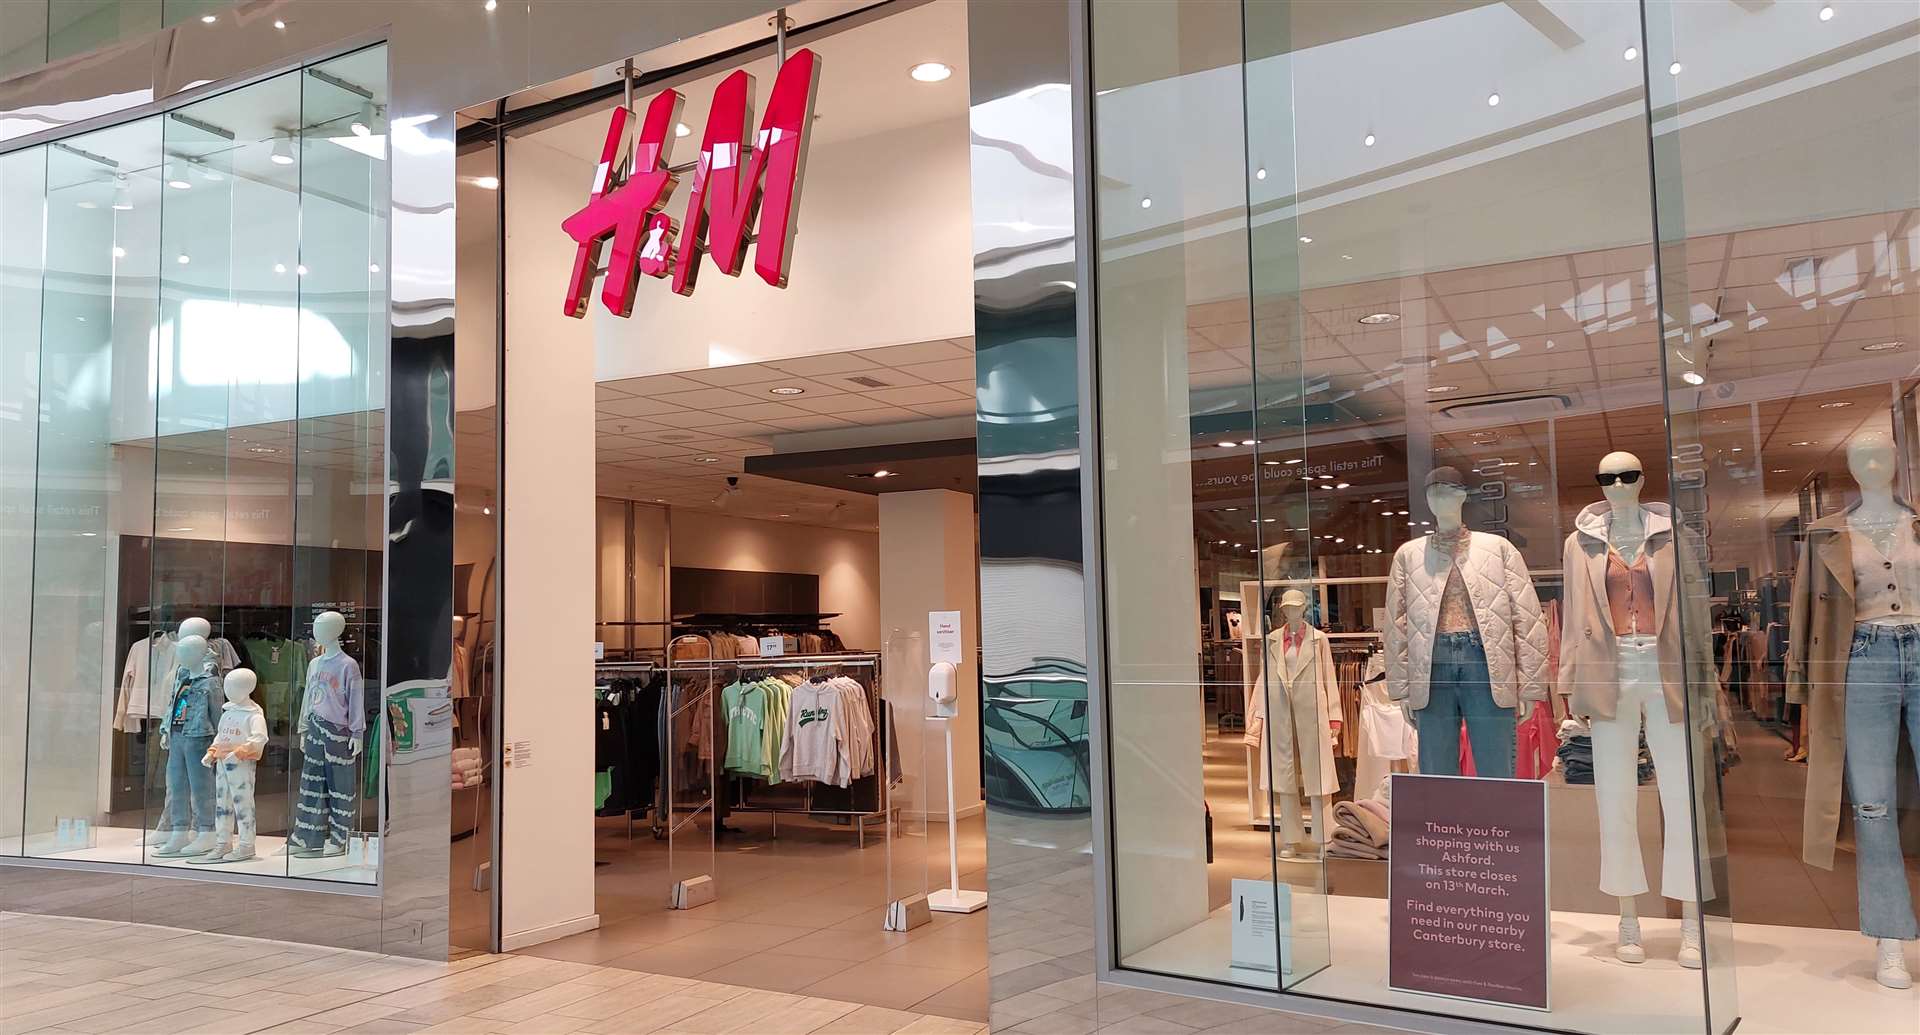 H&M in County Square in Ashford will be closing on March 13